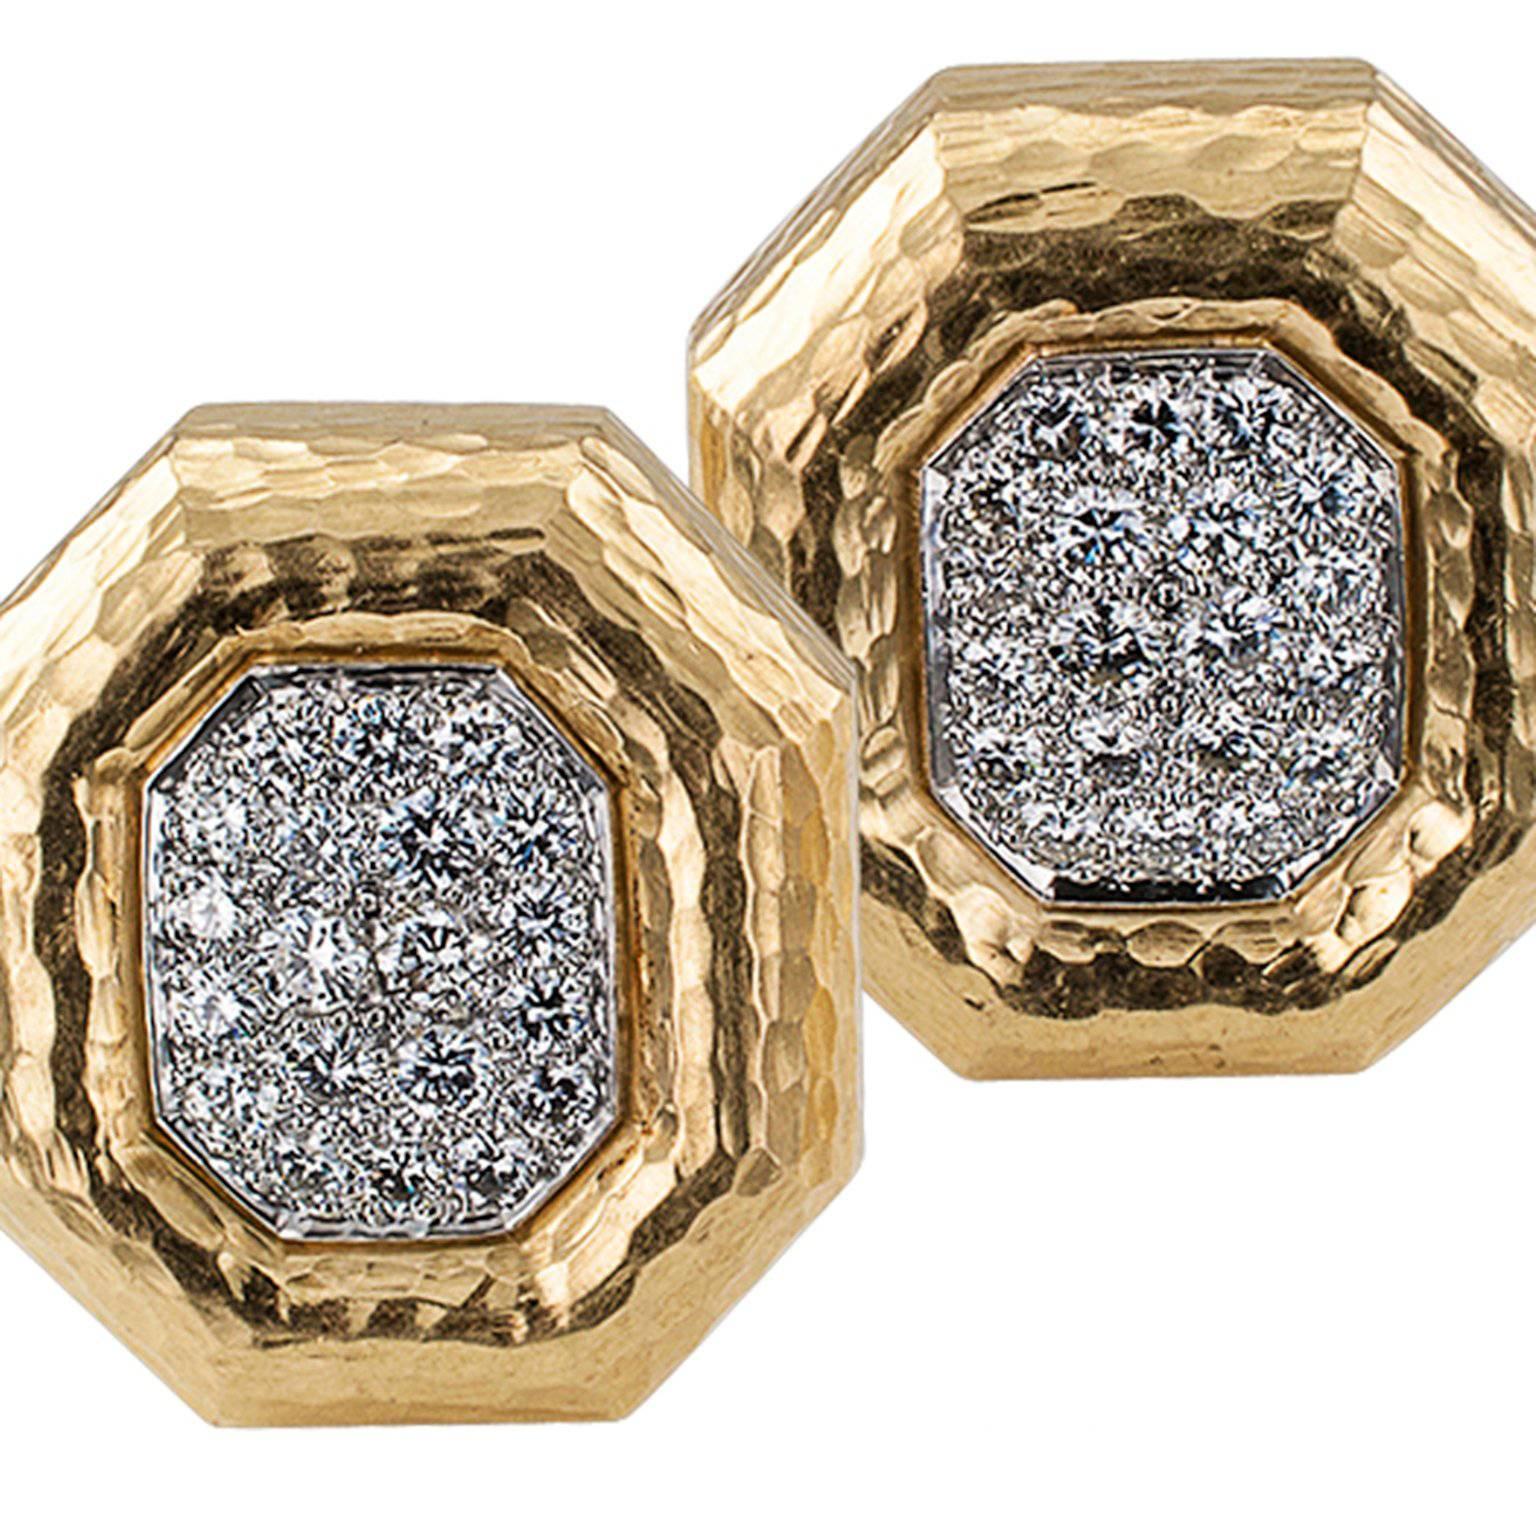 Andrew Clunn Octagonal Diamond Earrings

   Andrew Clunn octagonal diamond ear clips mounted in 18-karat gold and platinum circa 1980.  The pure form designs feature textured gold borders framing conforming platinum plaques set with diamonds